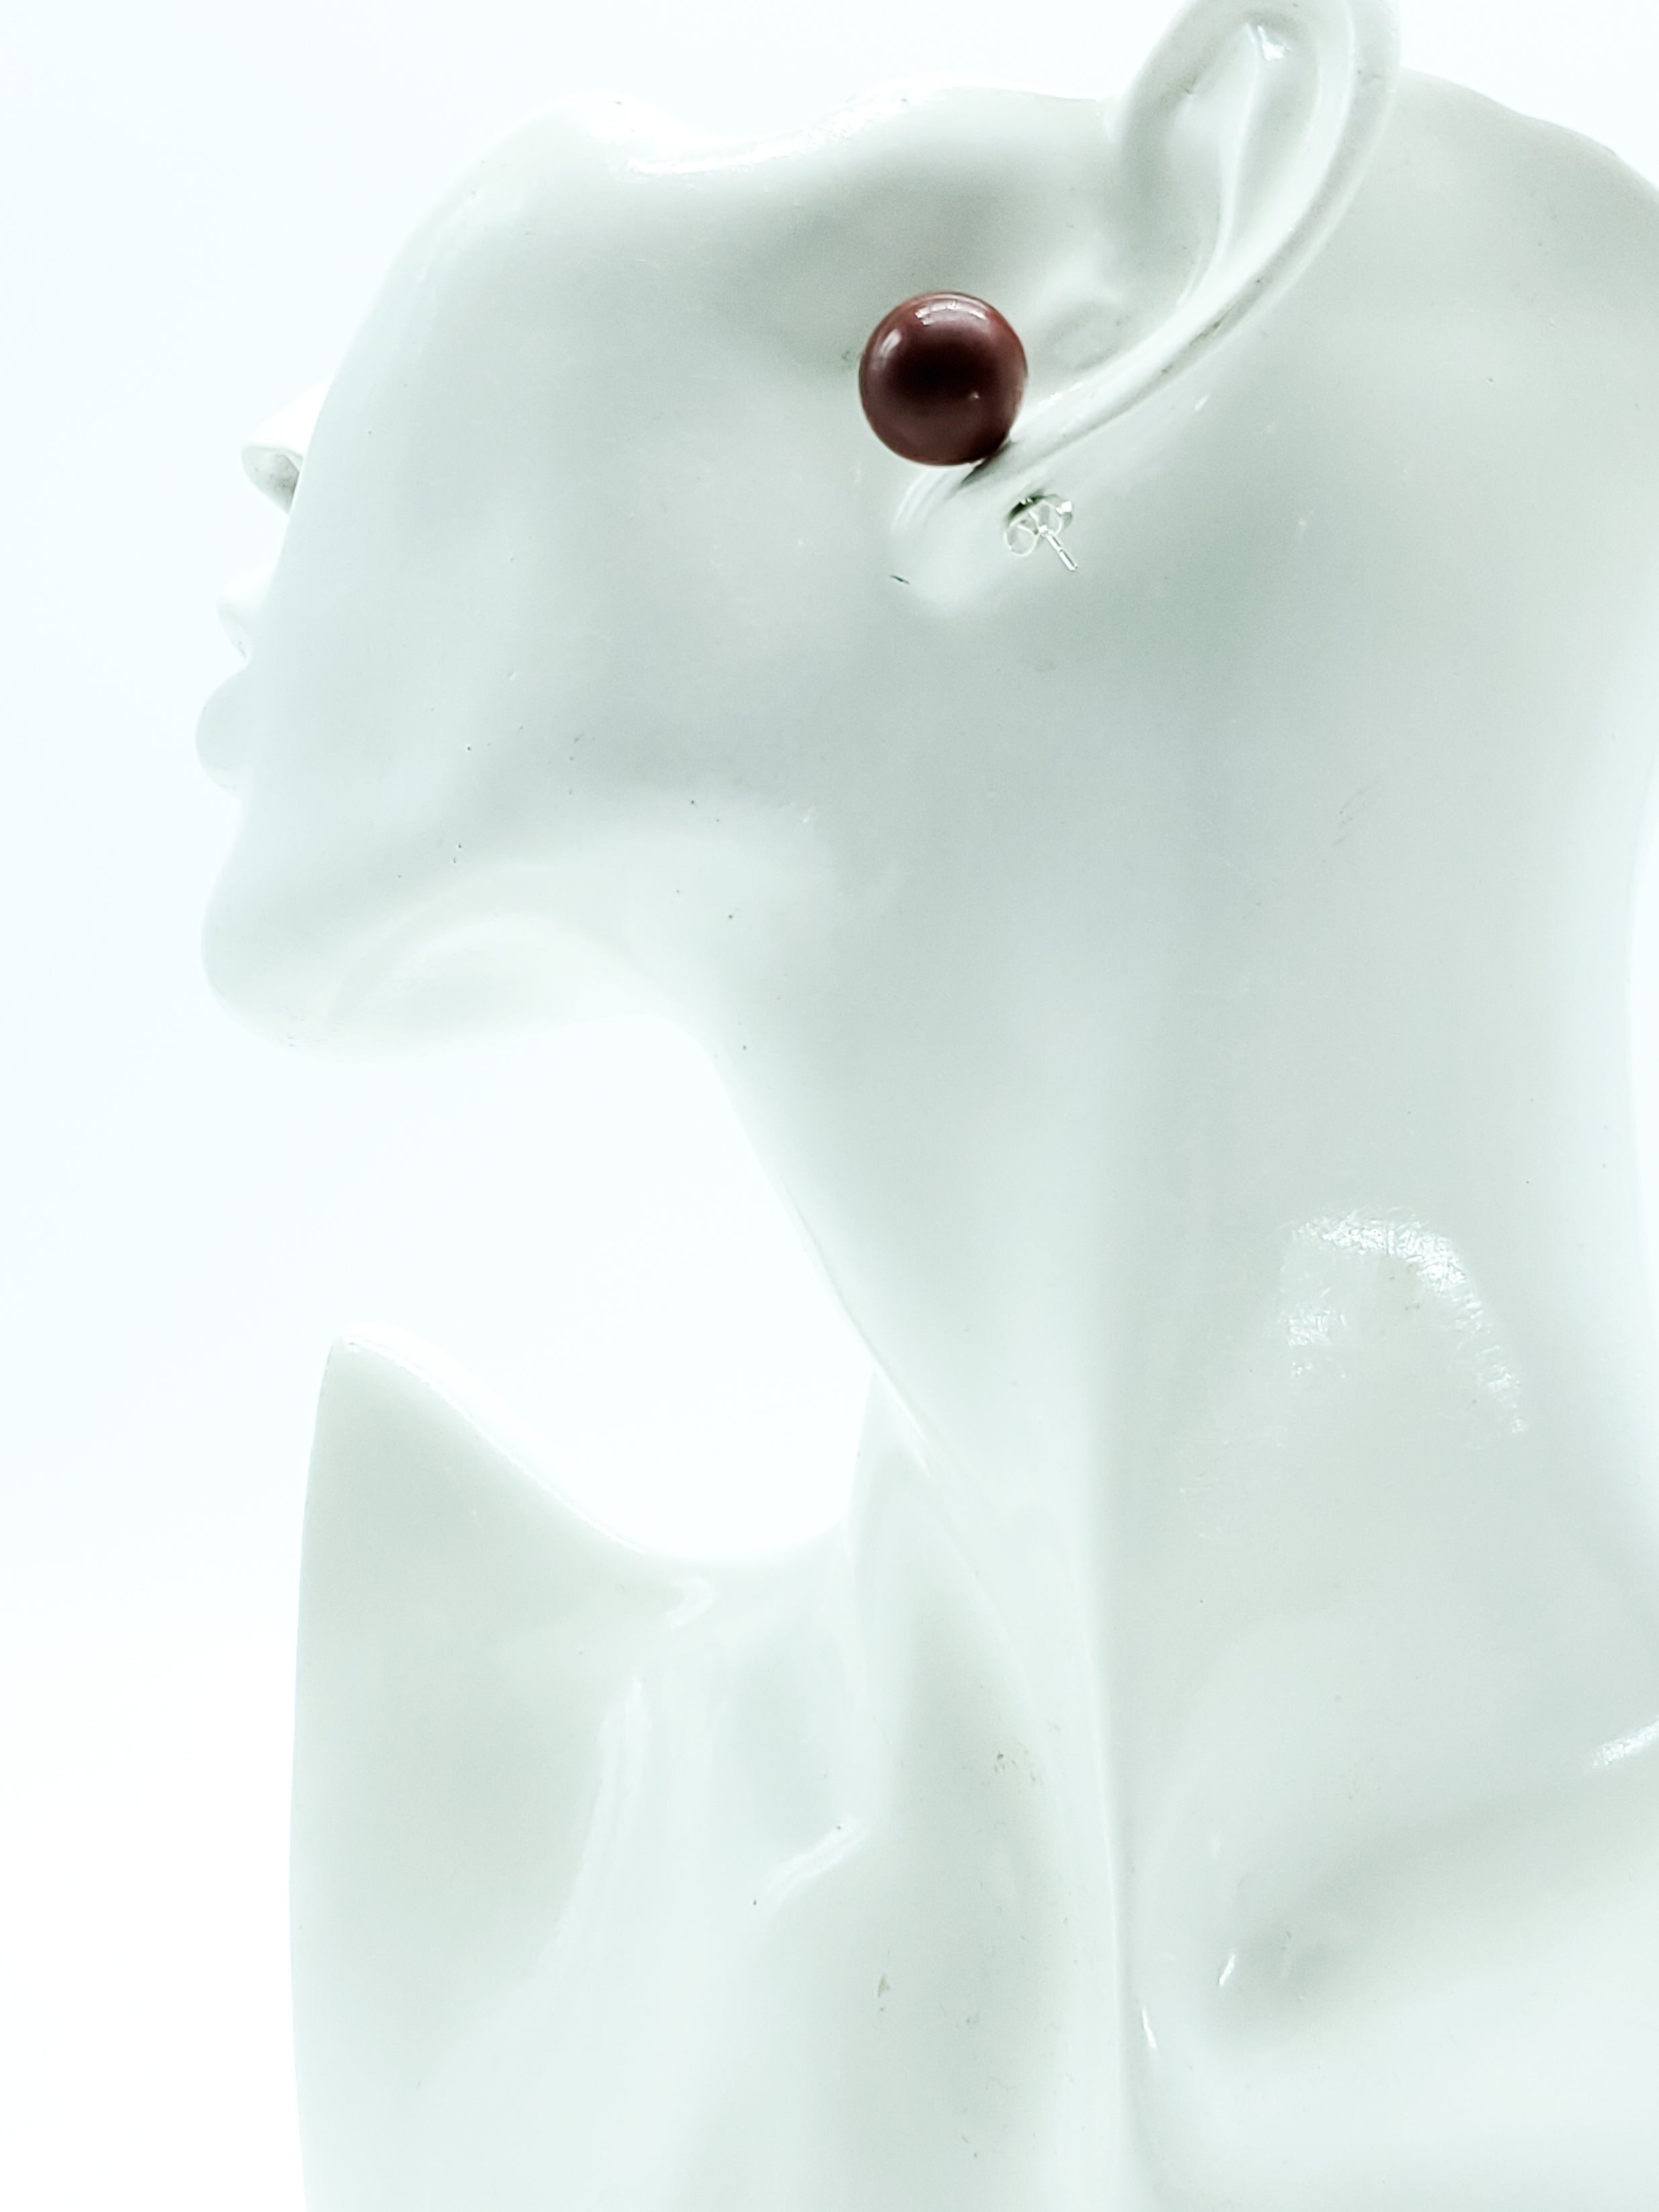 Red Jasper Earrings on Sterling Silver Studs - The Caffeinated Raven